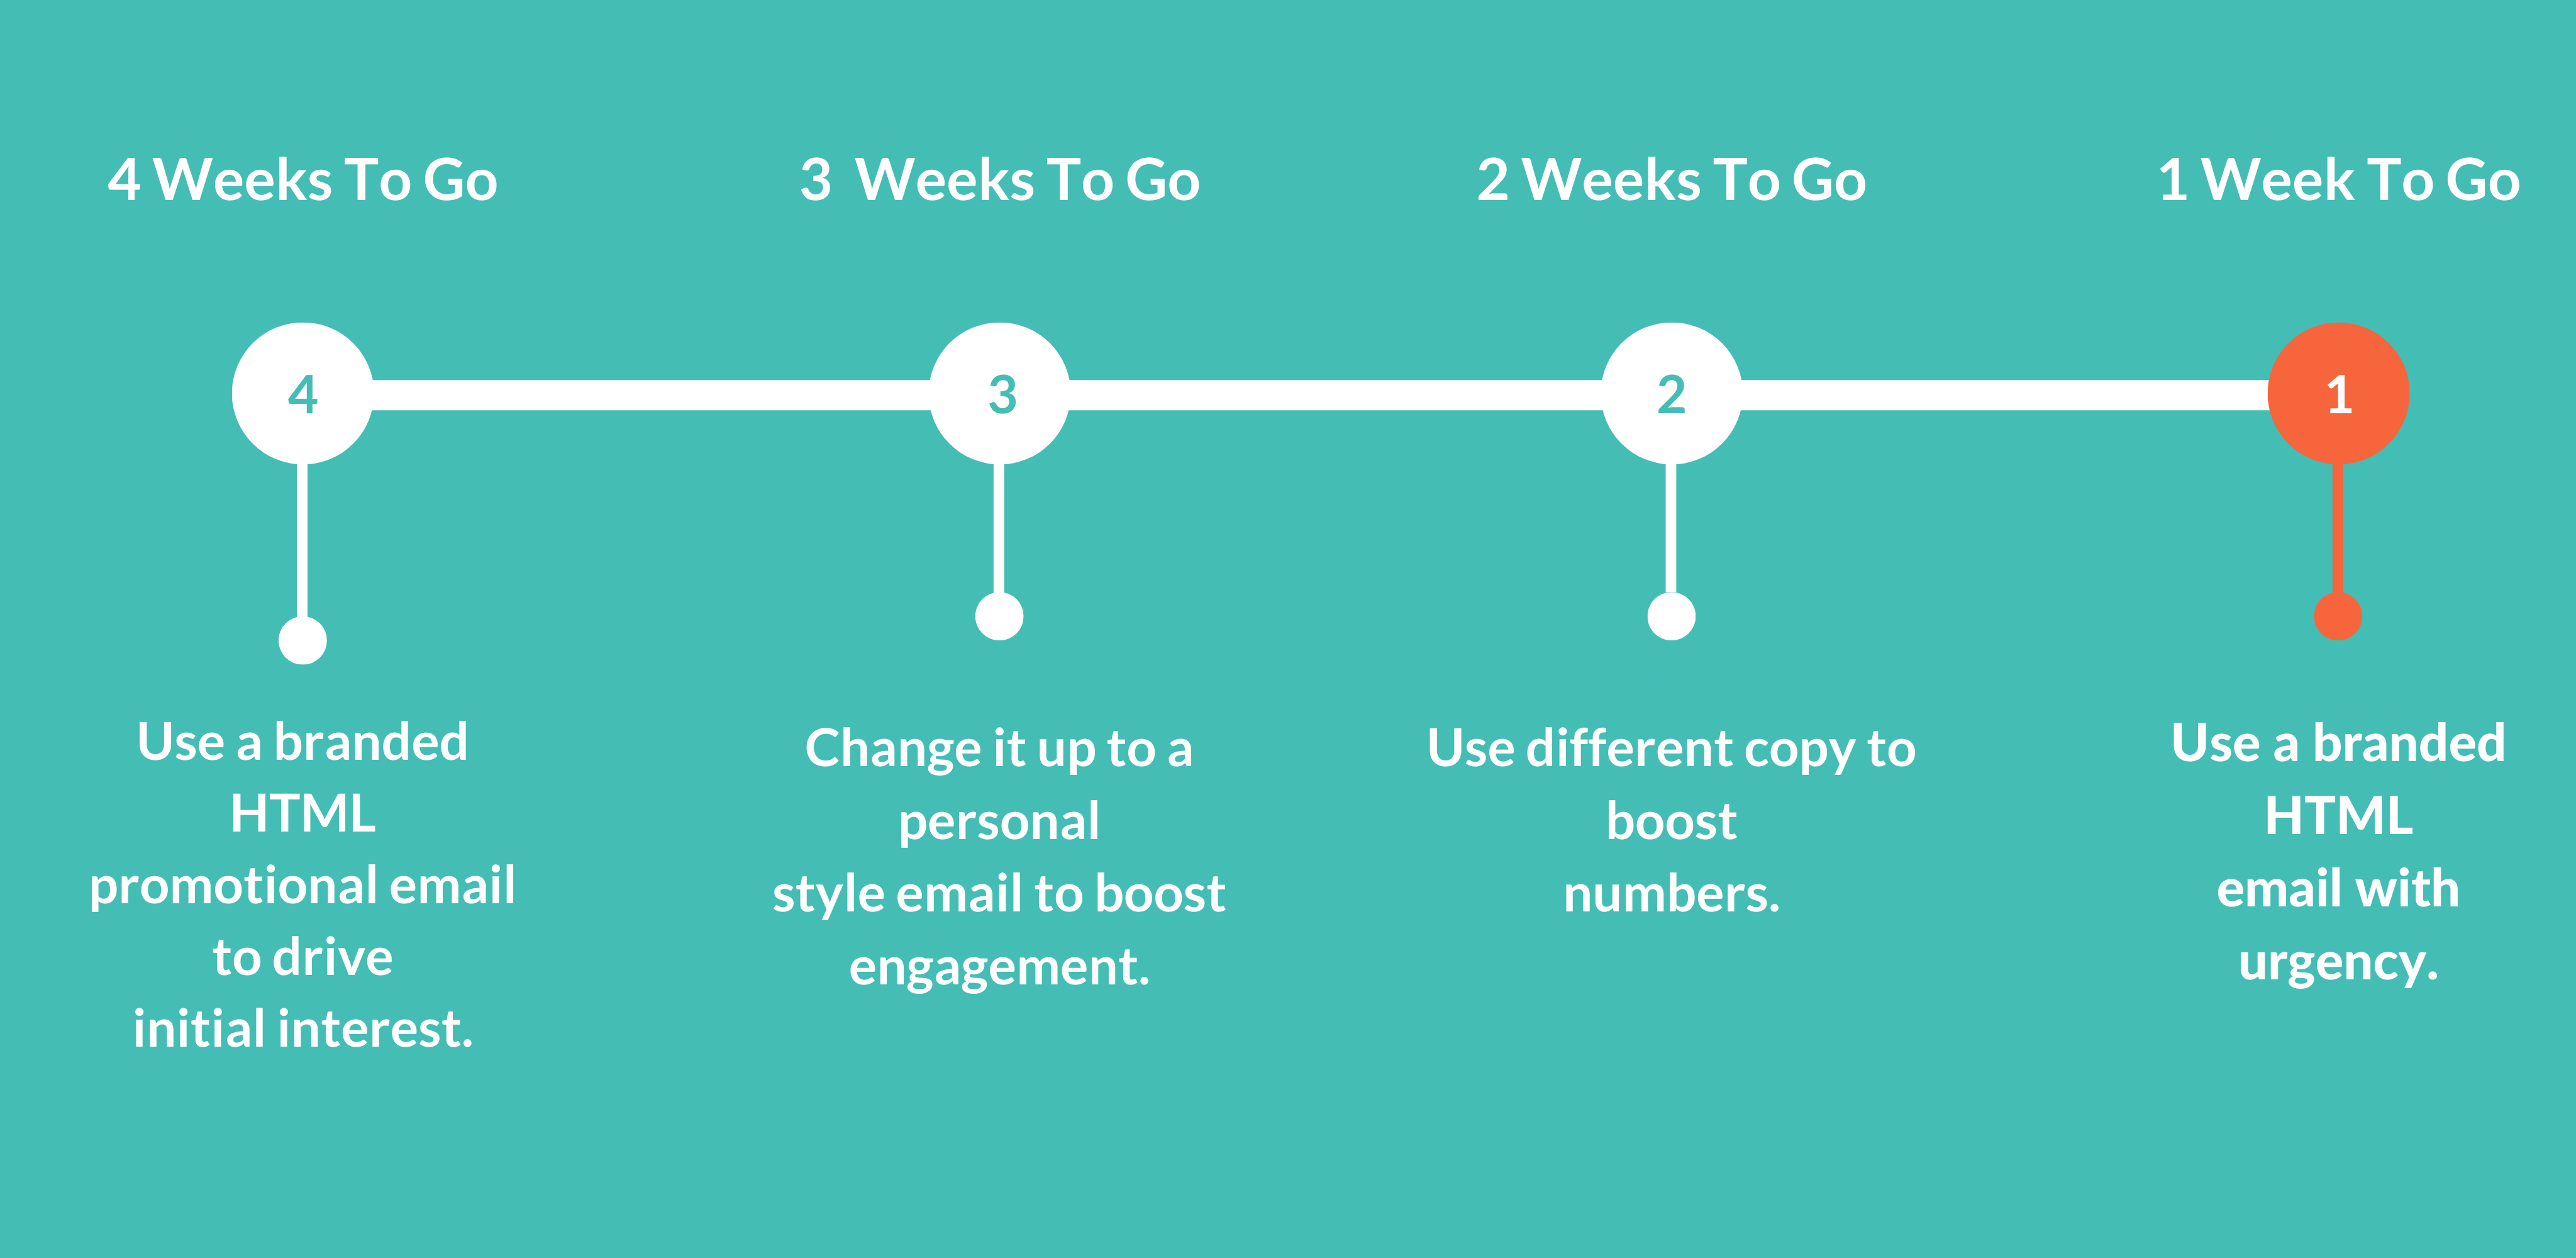 image of email strategy timeline